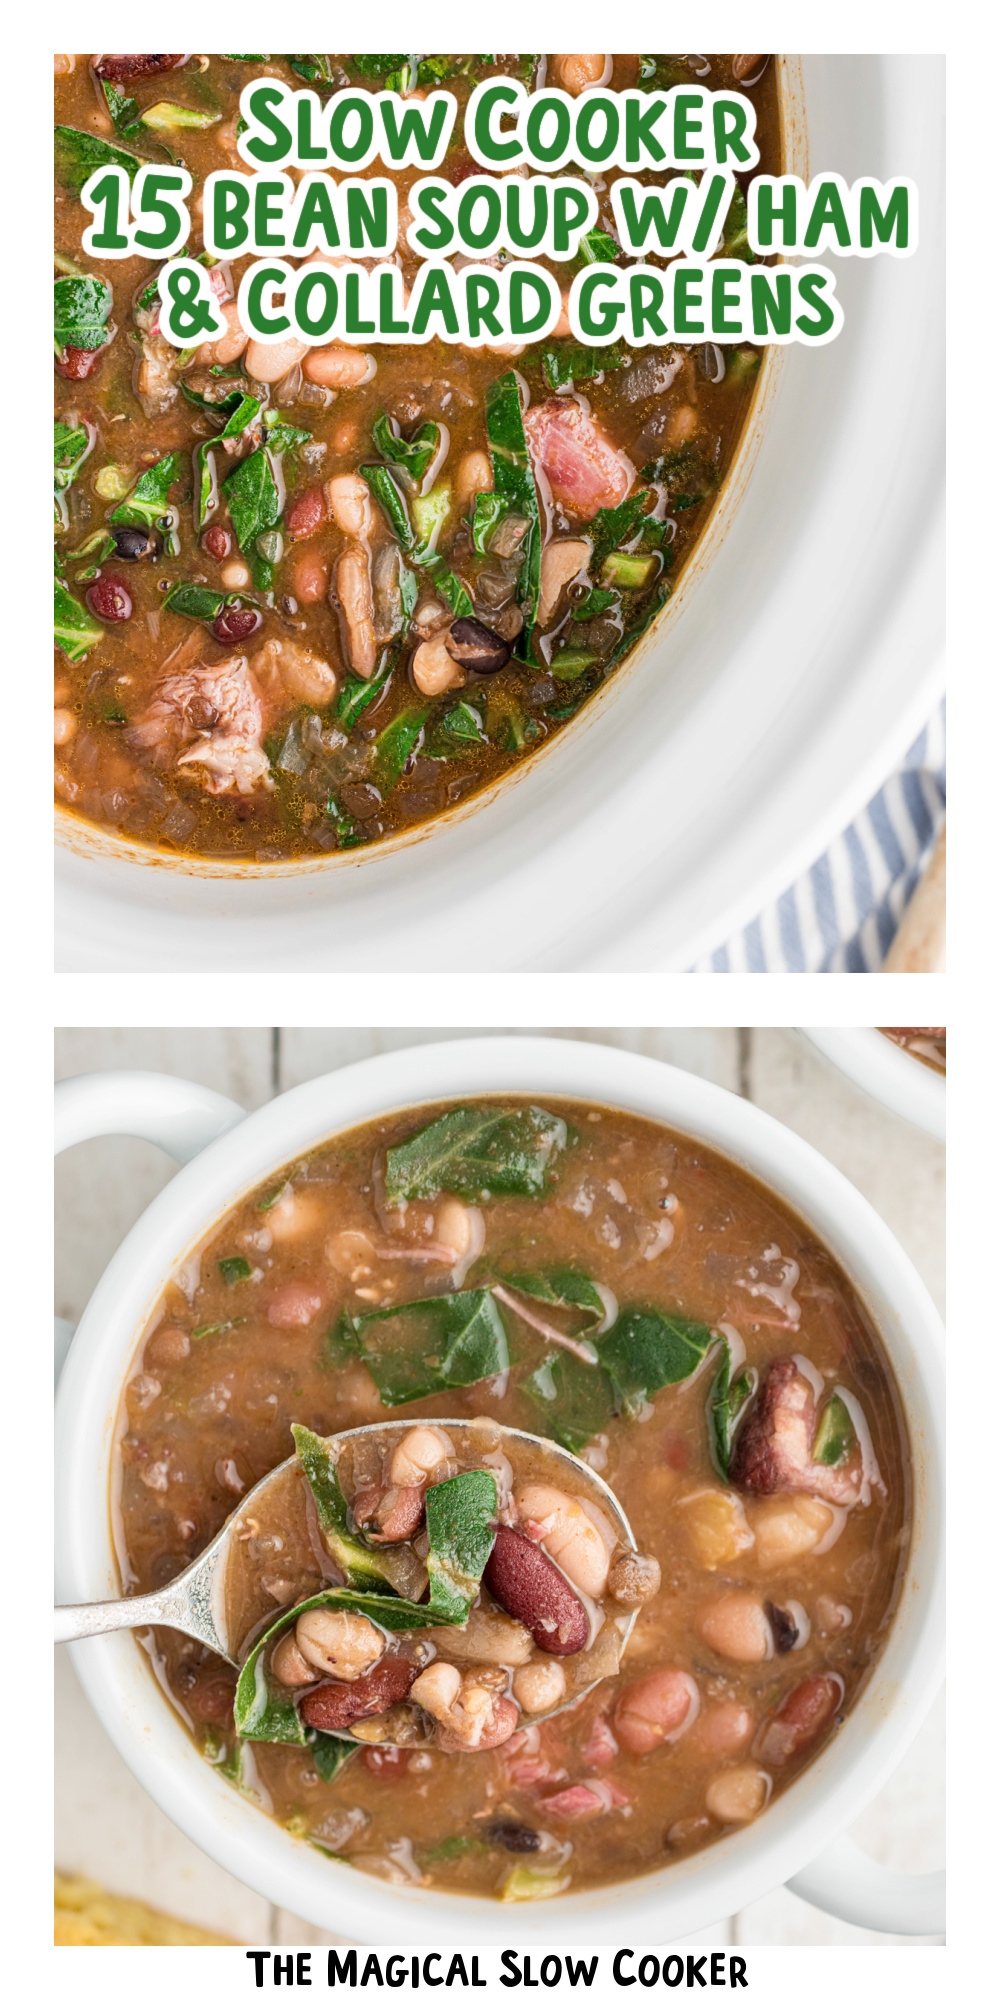 two images of slow cooker 15 bean soup with ham and collard greens with text title overlay.